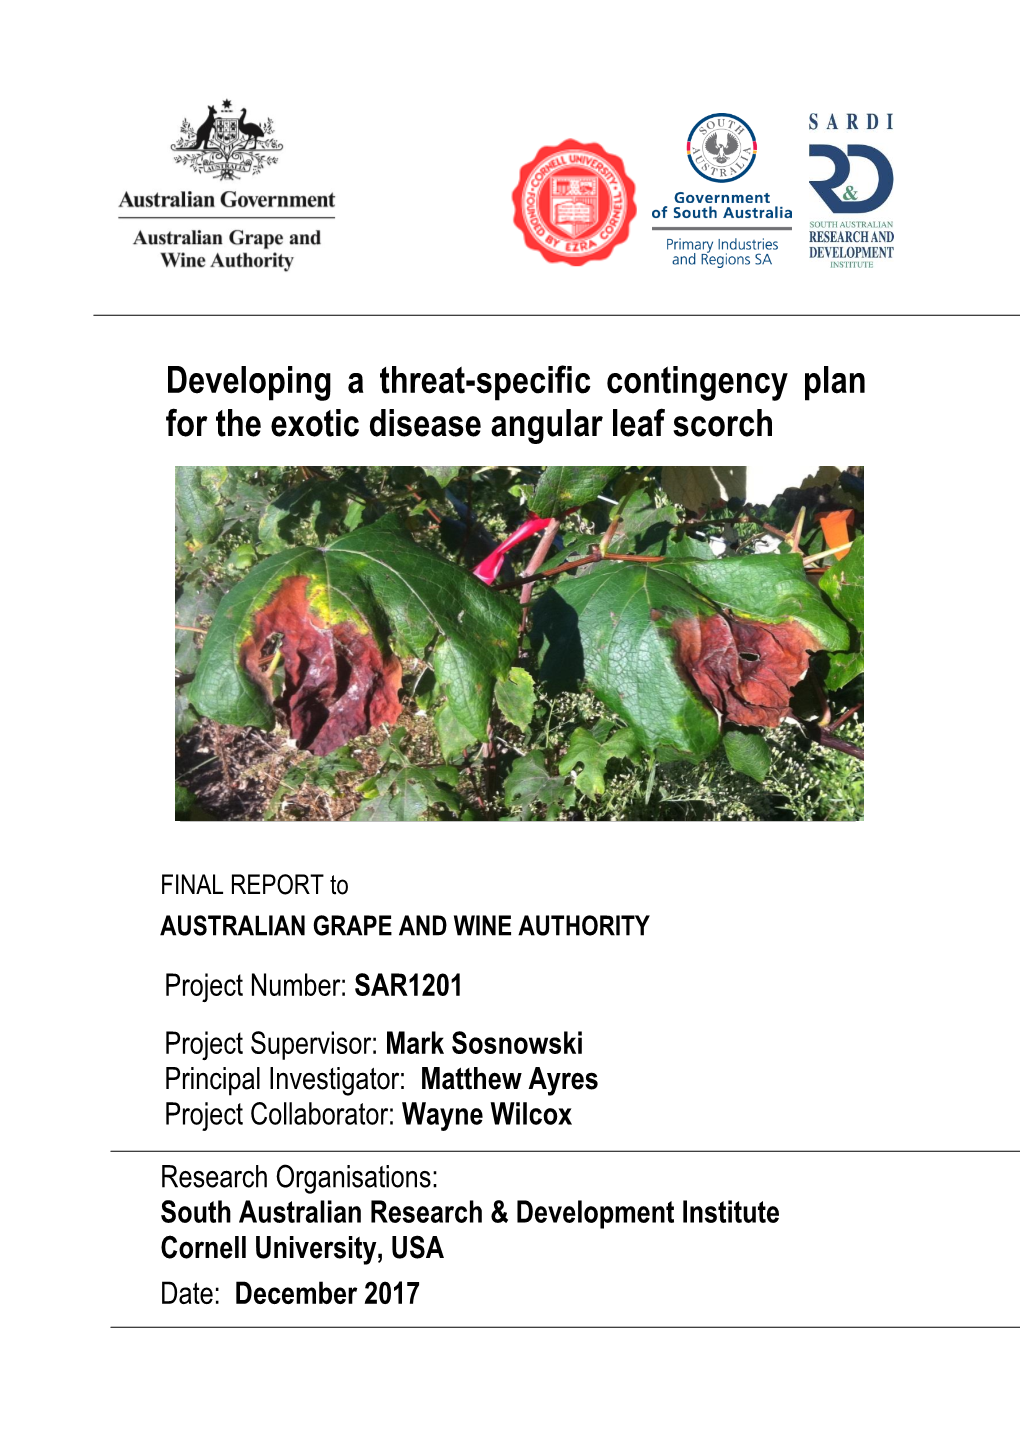 Developing a Threat-Specific Contingency Plan for the Exotic Disease Angular Leaf Scorch